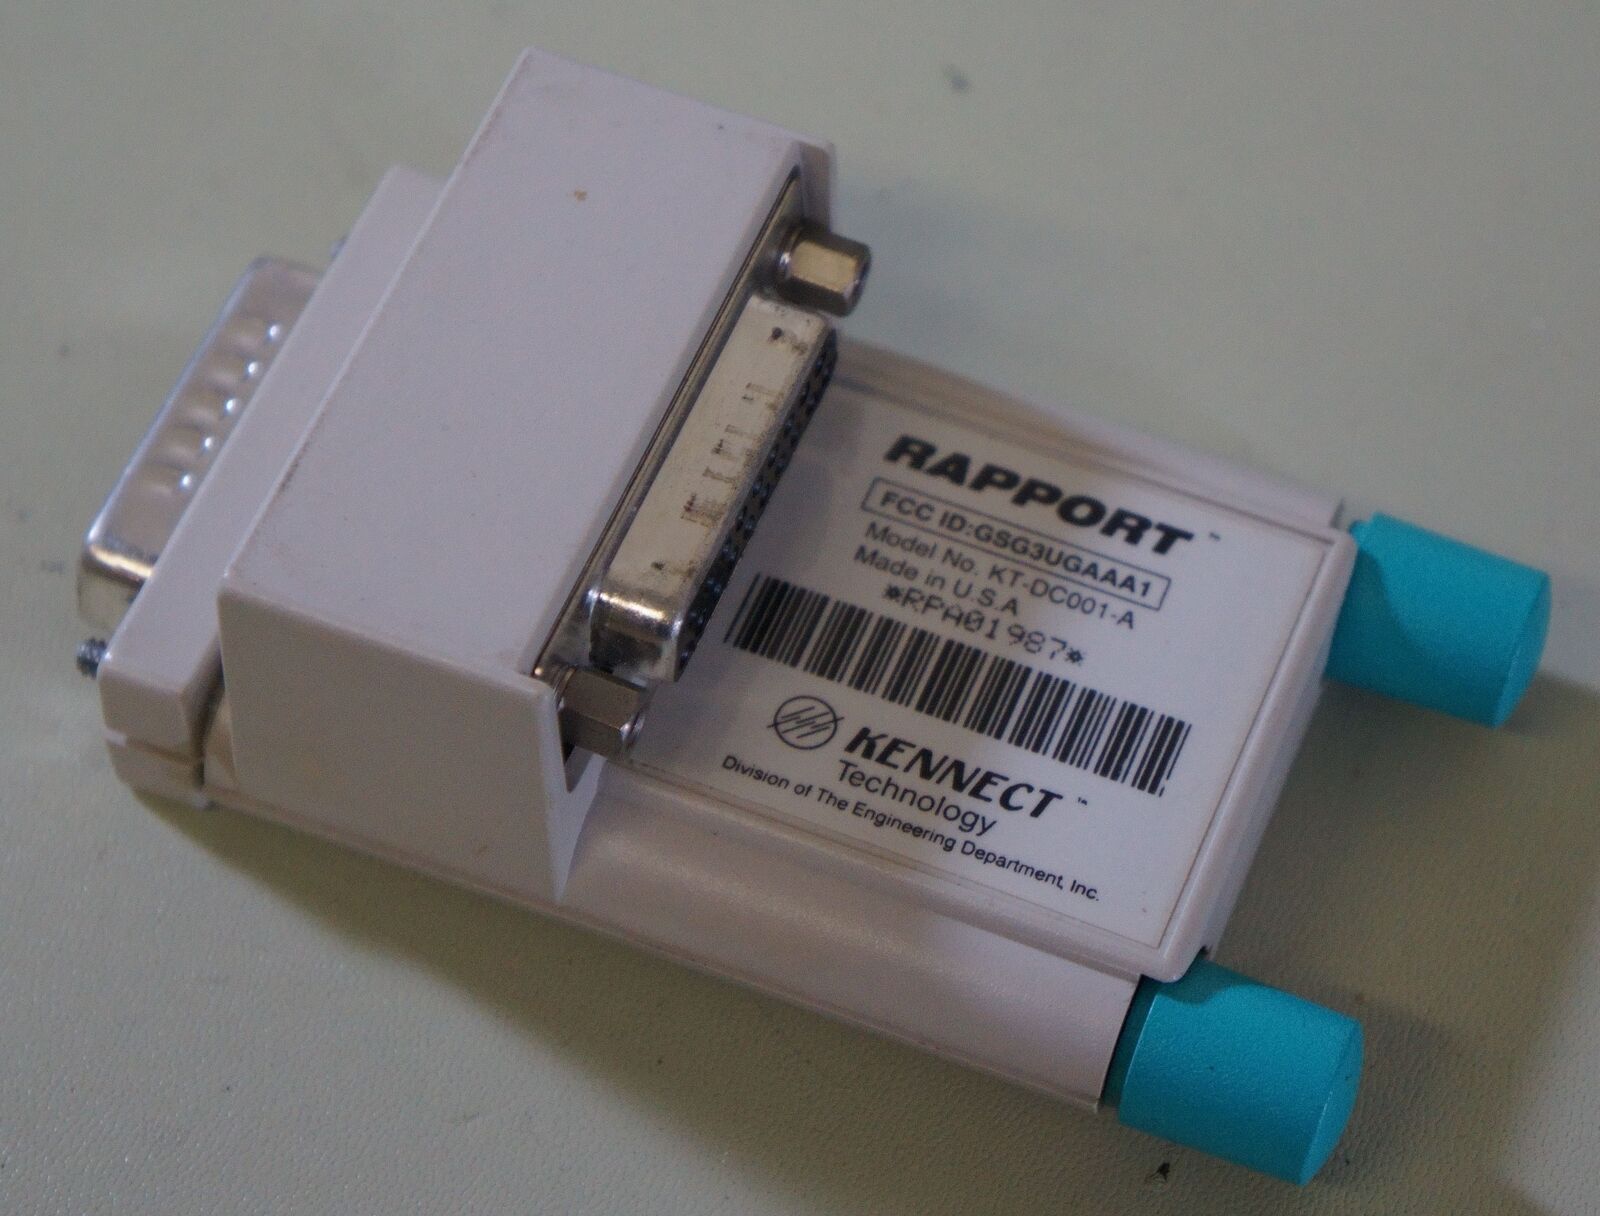 Kennect Technology KT-DC001-A Rapport Floppy Drive Adapter for Macintosh